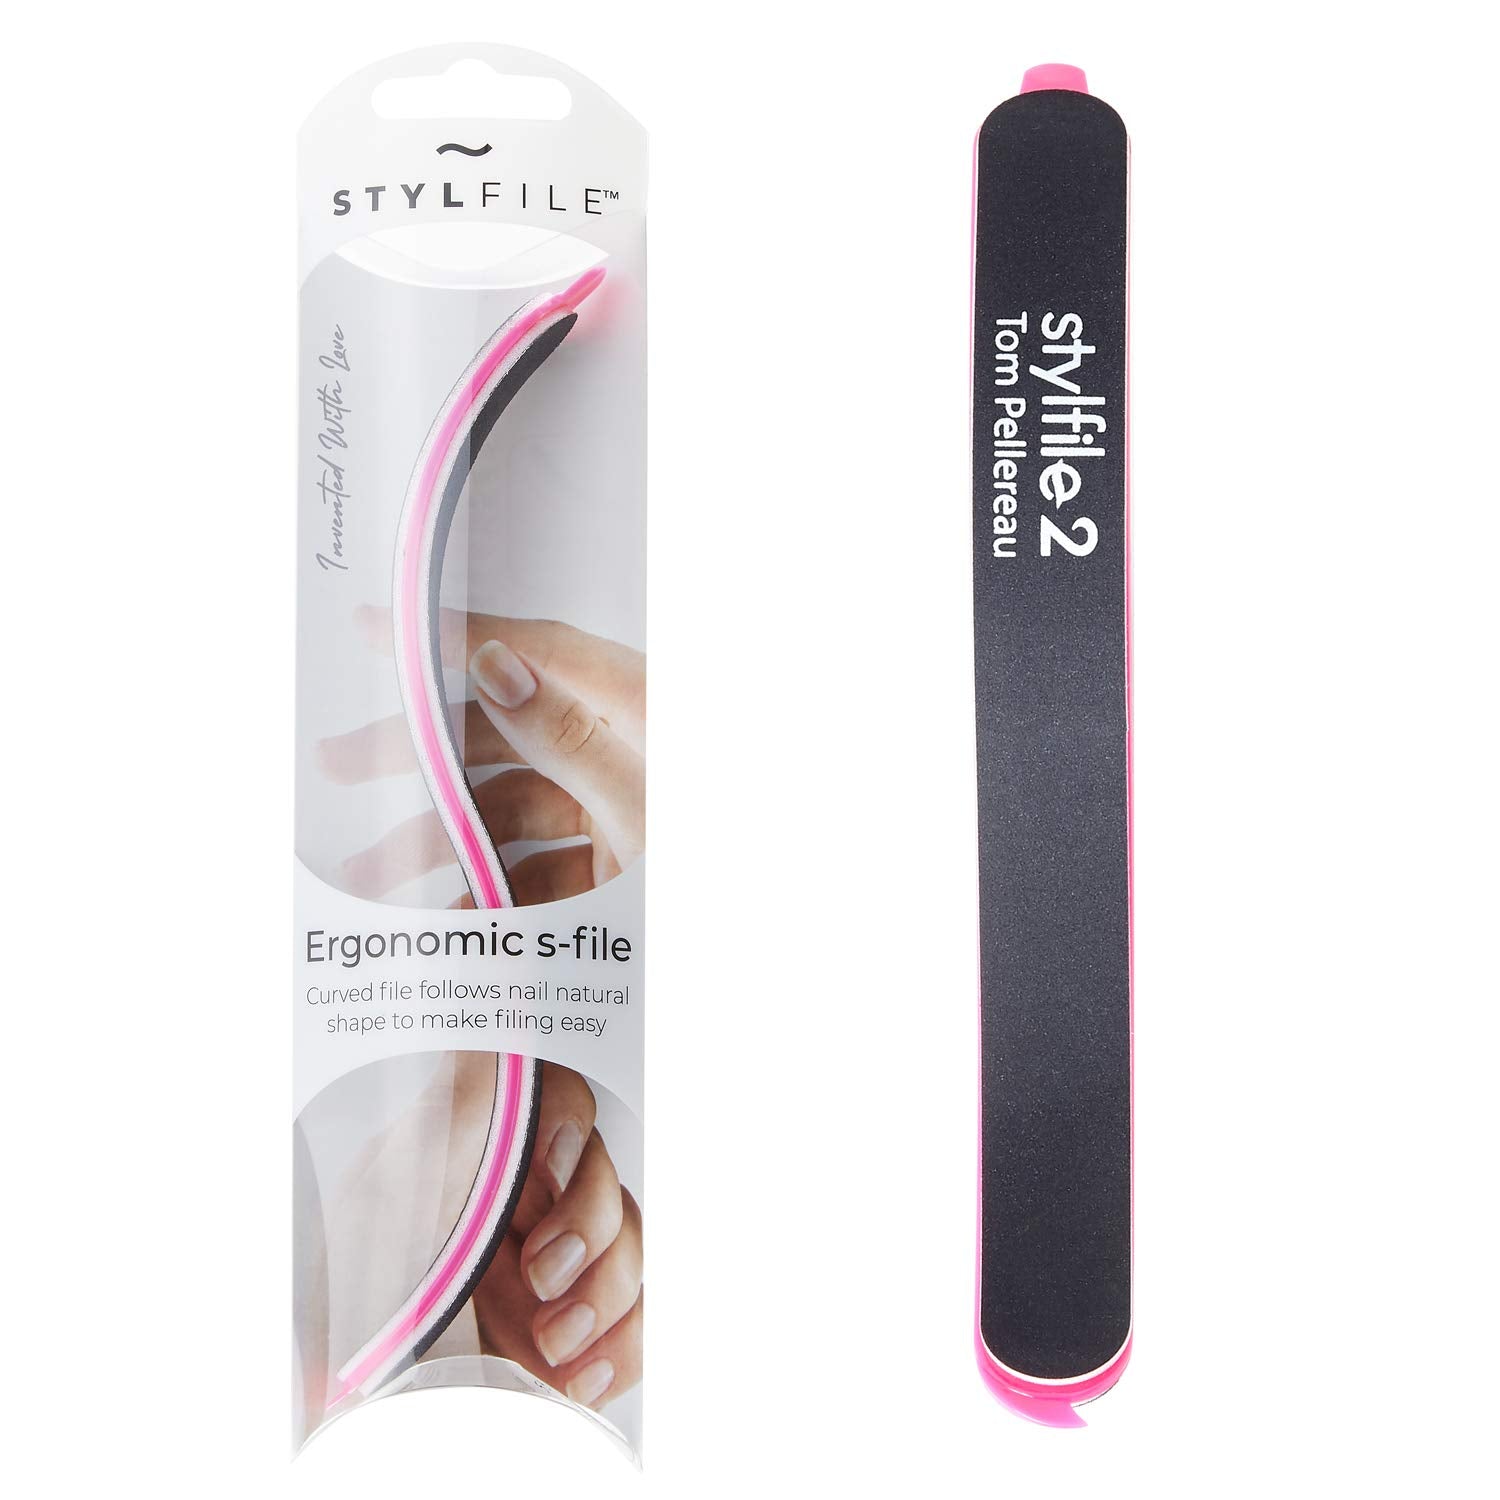 Stylfile Stylideas Nail Files and Other Accessories (Various Products for Nails and Beauty) (Curved Nail File)